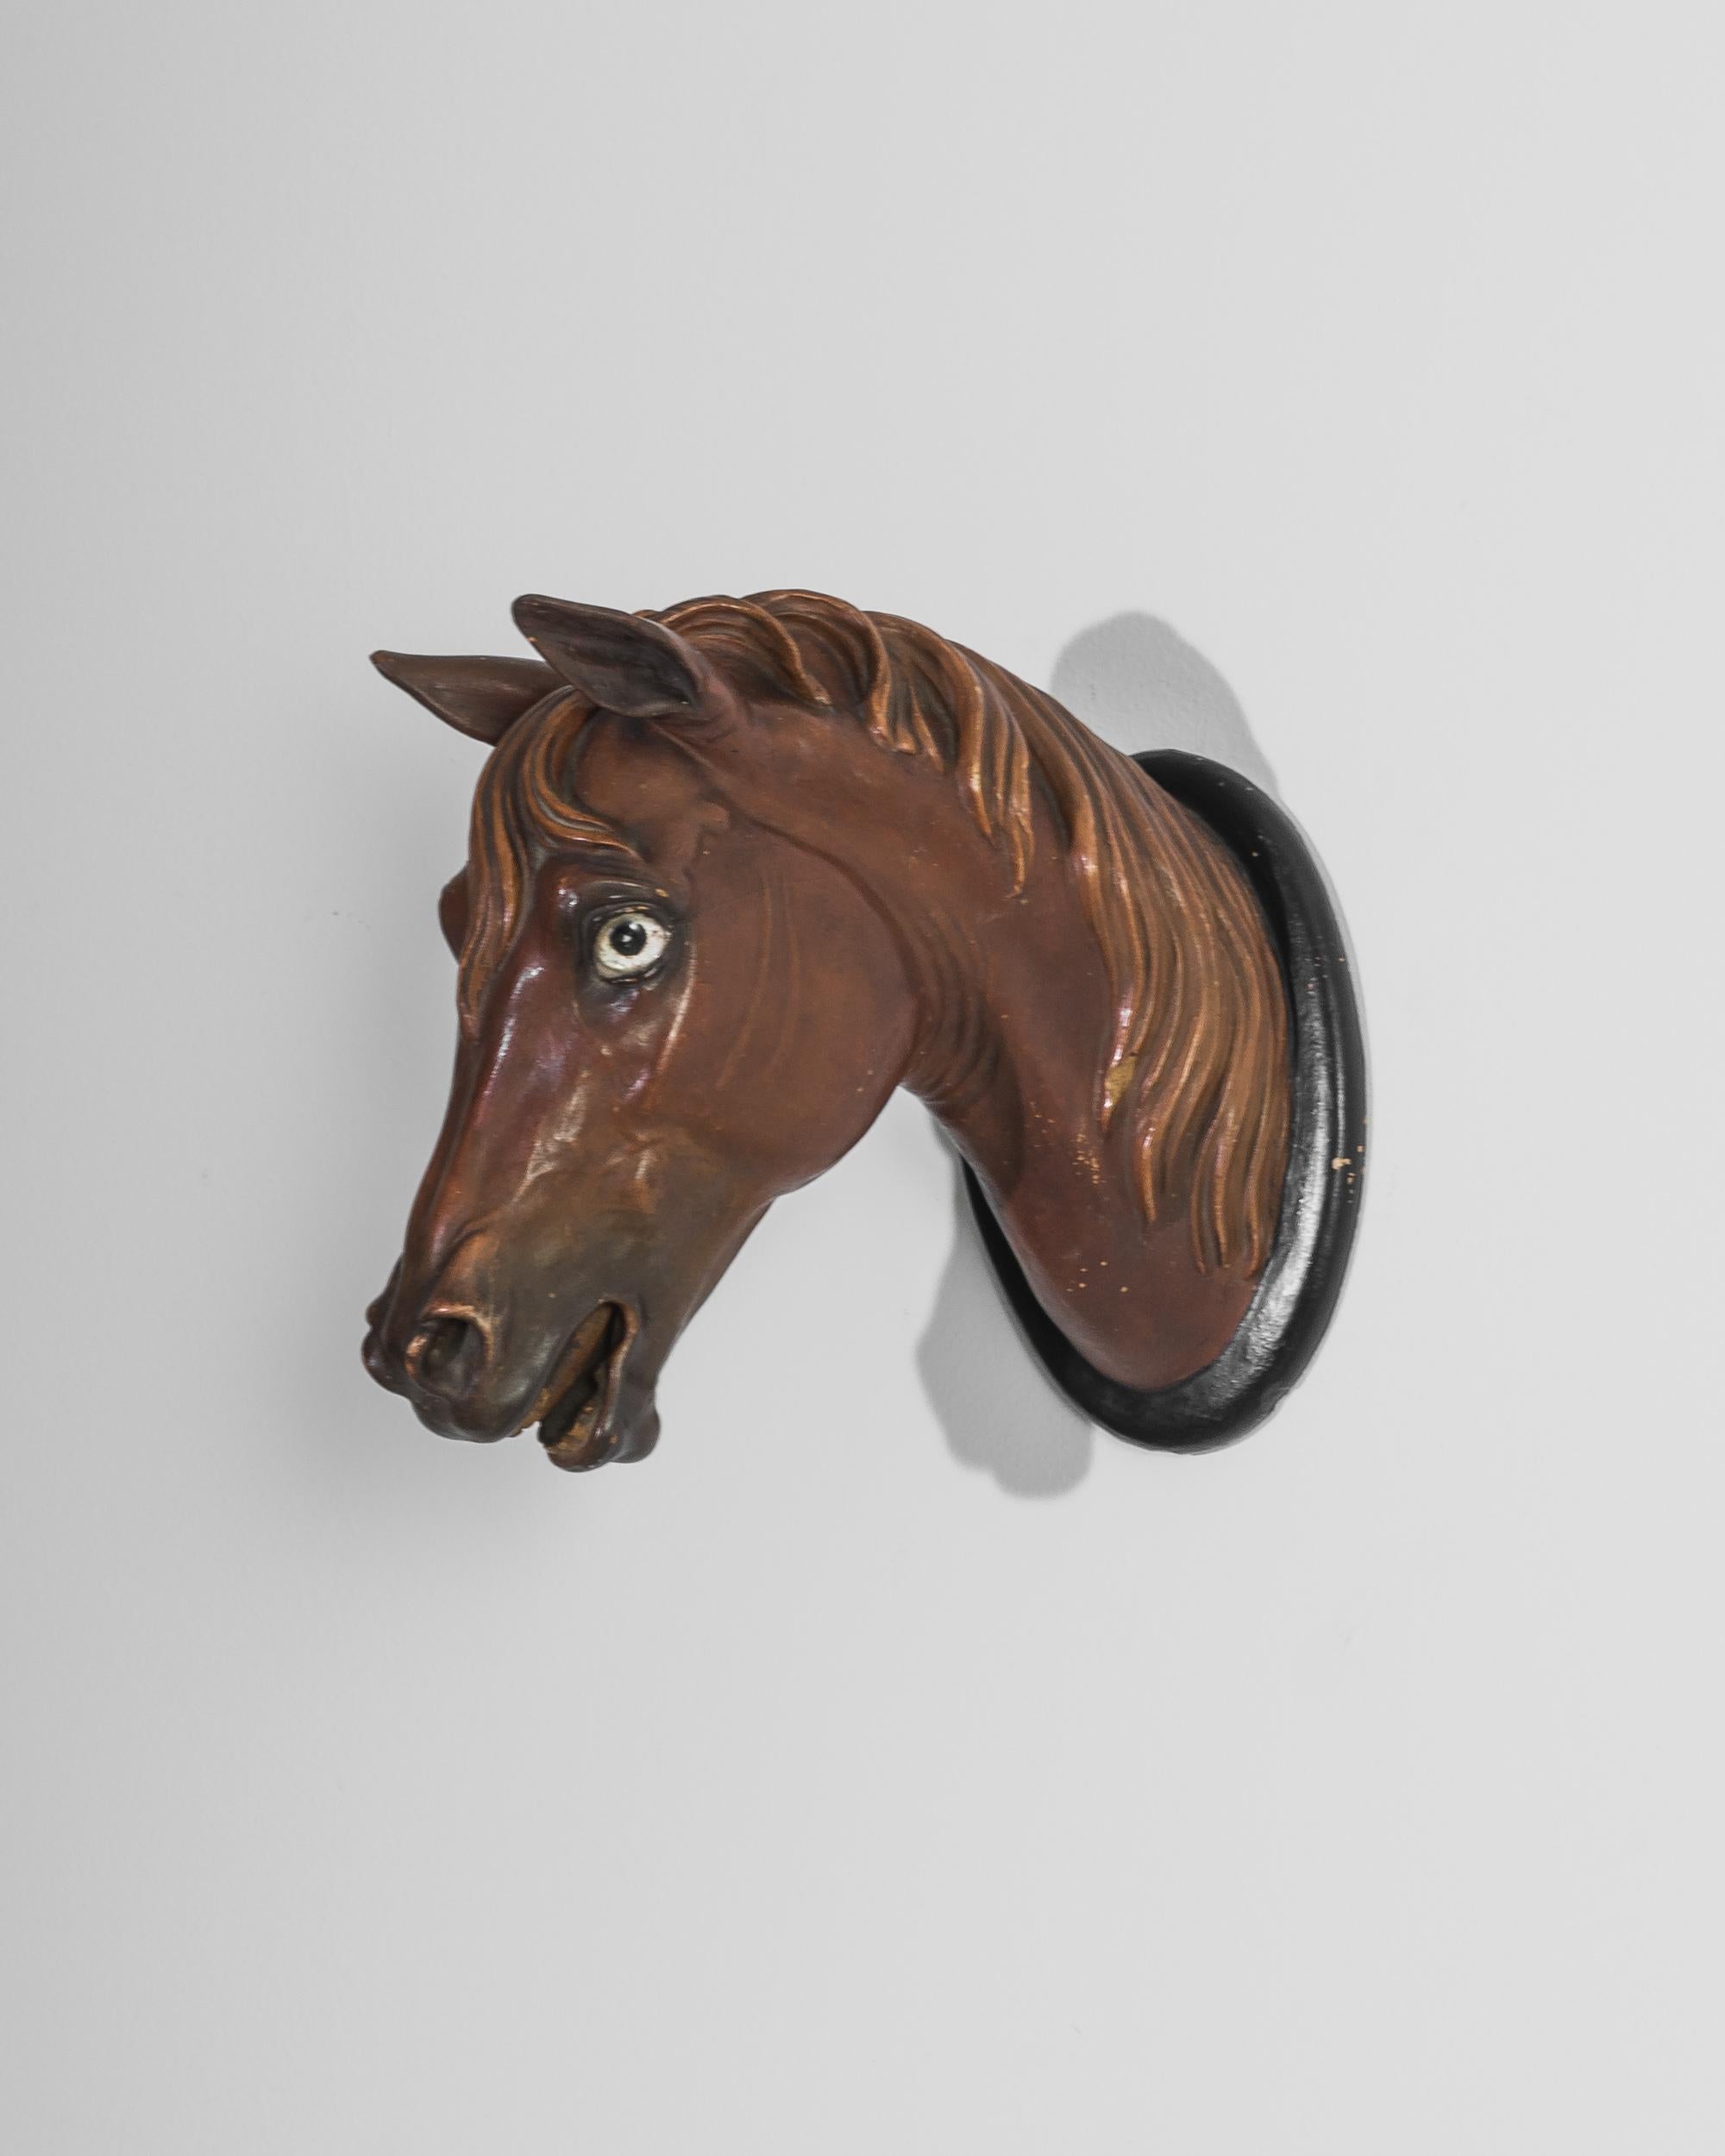 protome, this wall sculpture was made in the UK circa 1900. As if depicted in motion, wide open eyes, flaring nostrils and a passionate neigh frozen on its lips, this realistically molded horse head exudes the bold energy of an untamed animal. A